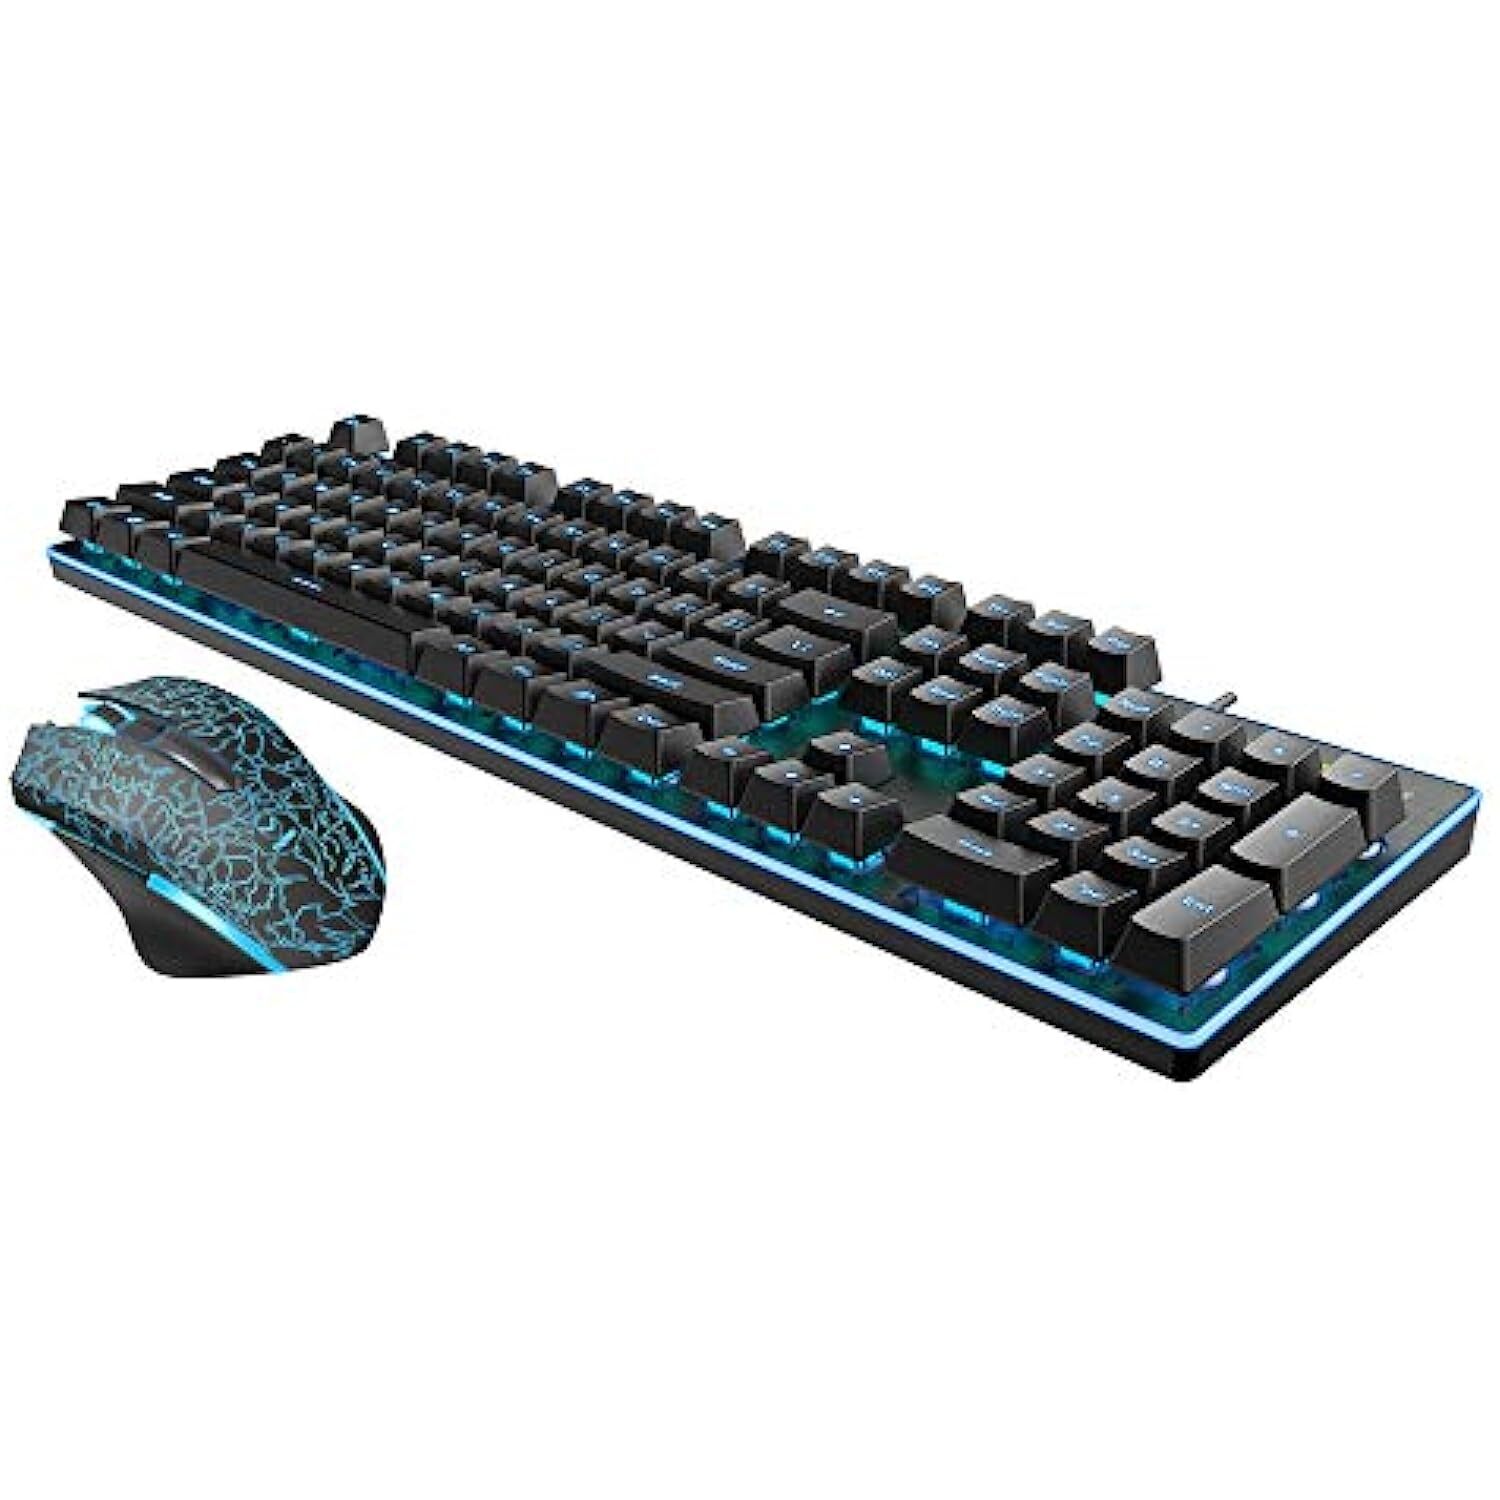 Rapoo V100S Gaming Keyboard & Mouse Combo with Adjustable Backlit, Optical Gaming Mouse with 6400 DPI